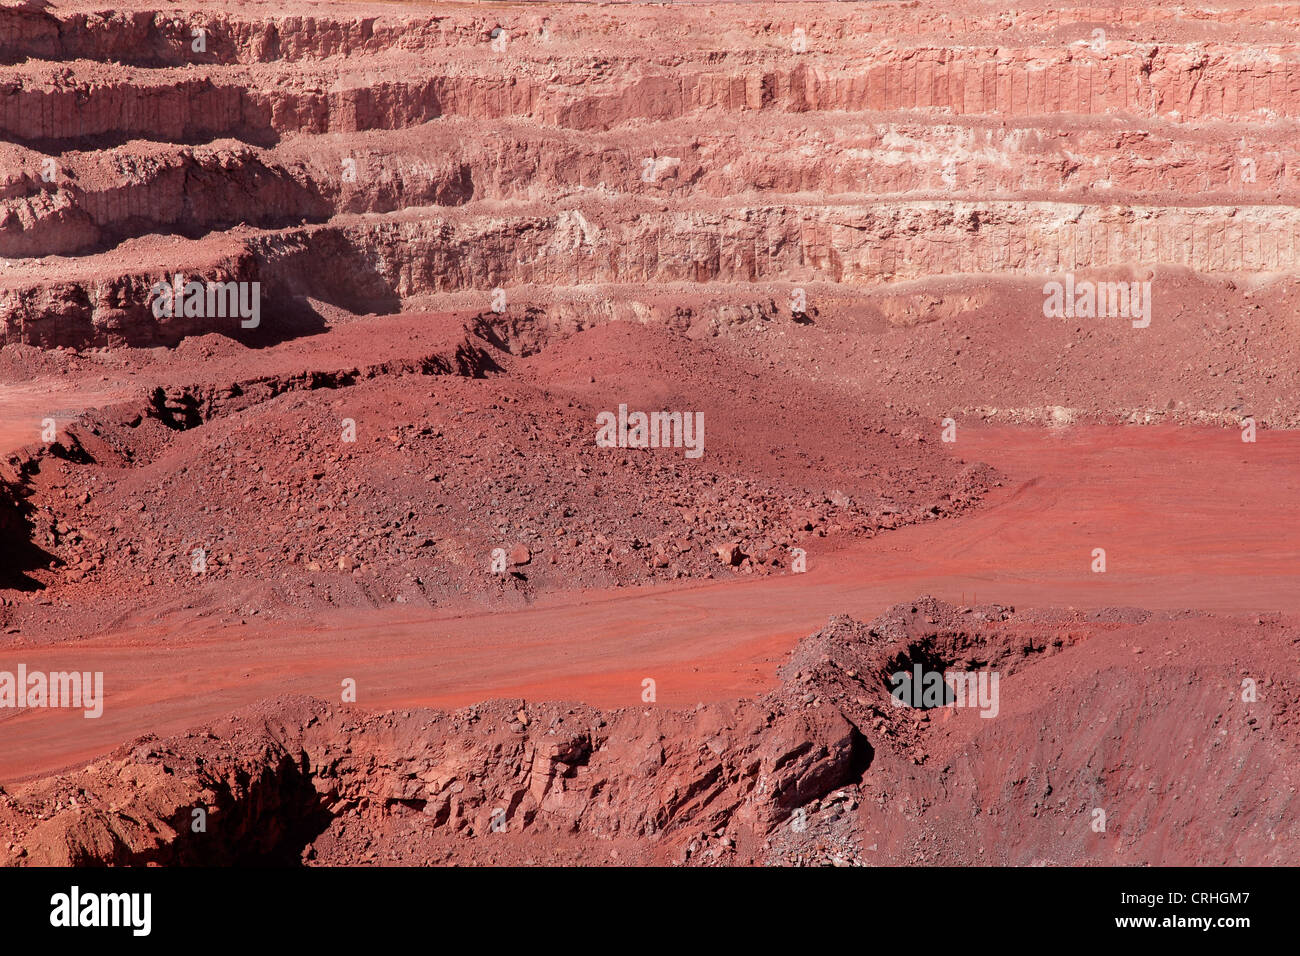 Large, open-pit iron ore mine showing the various layers of soil and iron rich ore Stock Photo